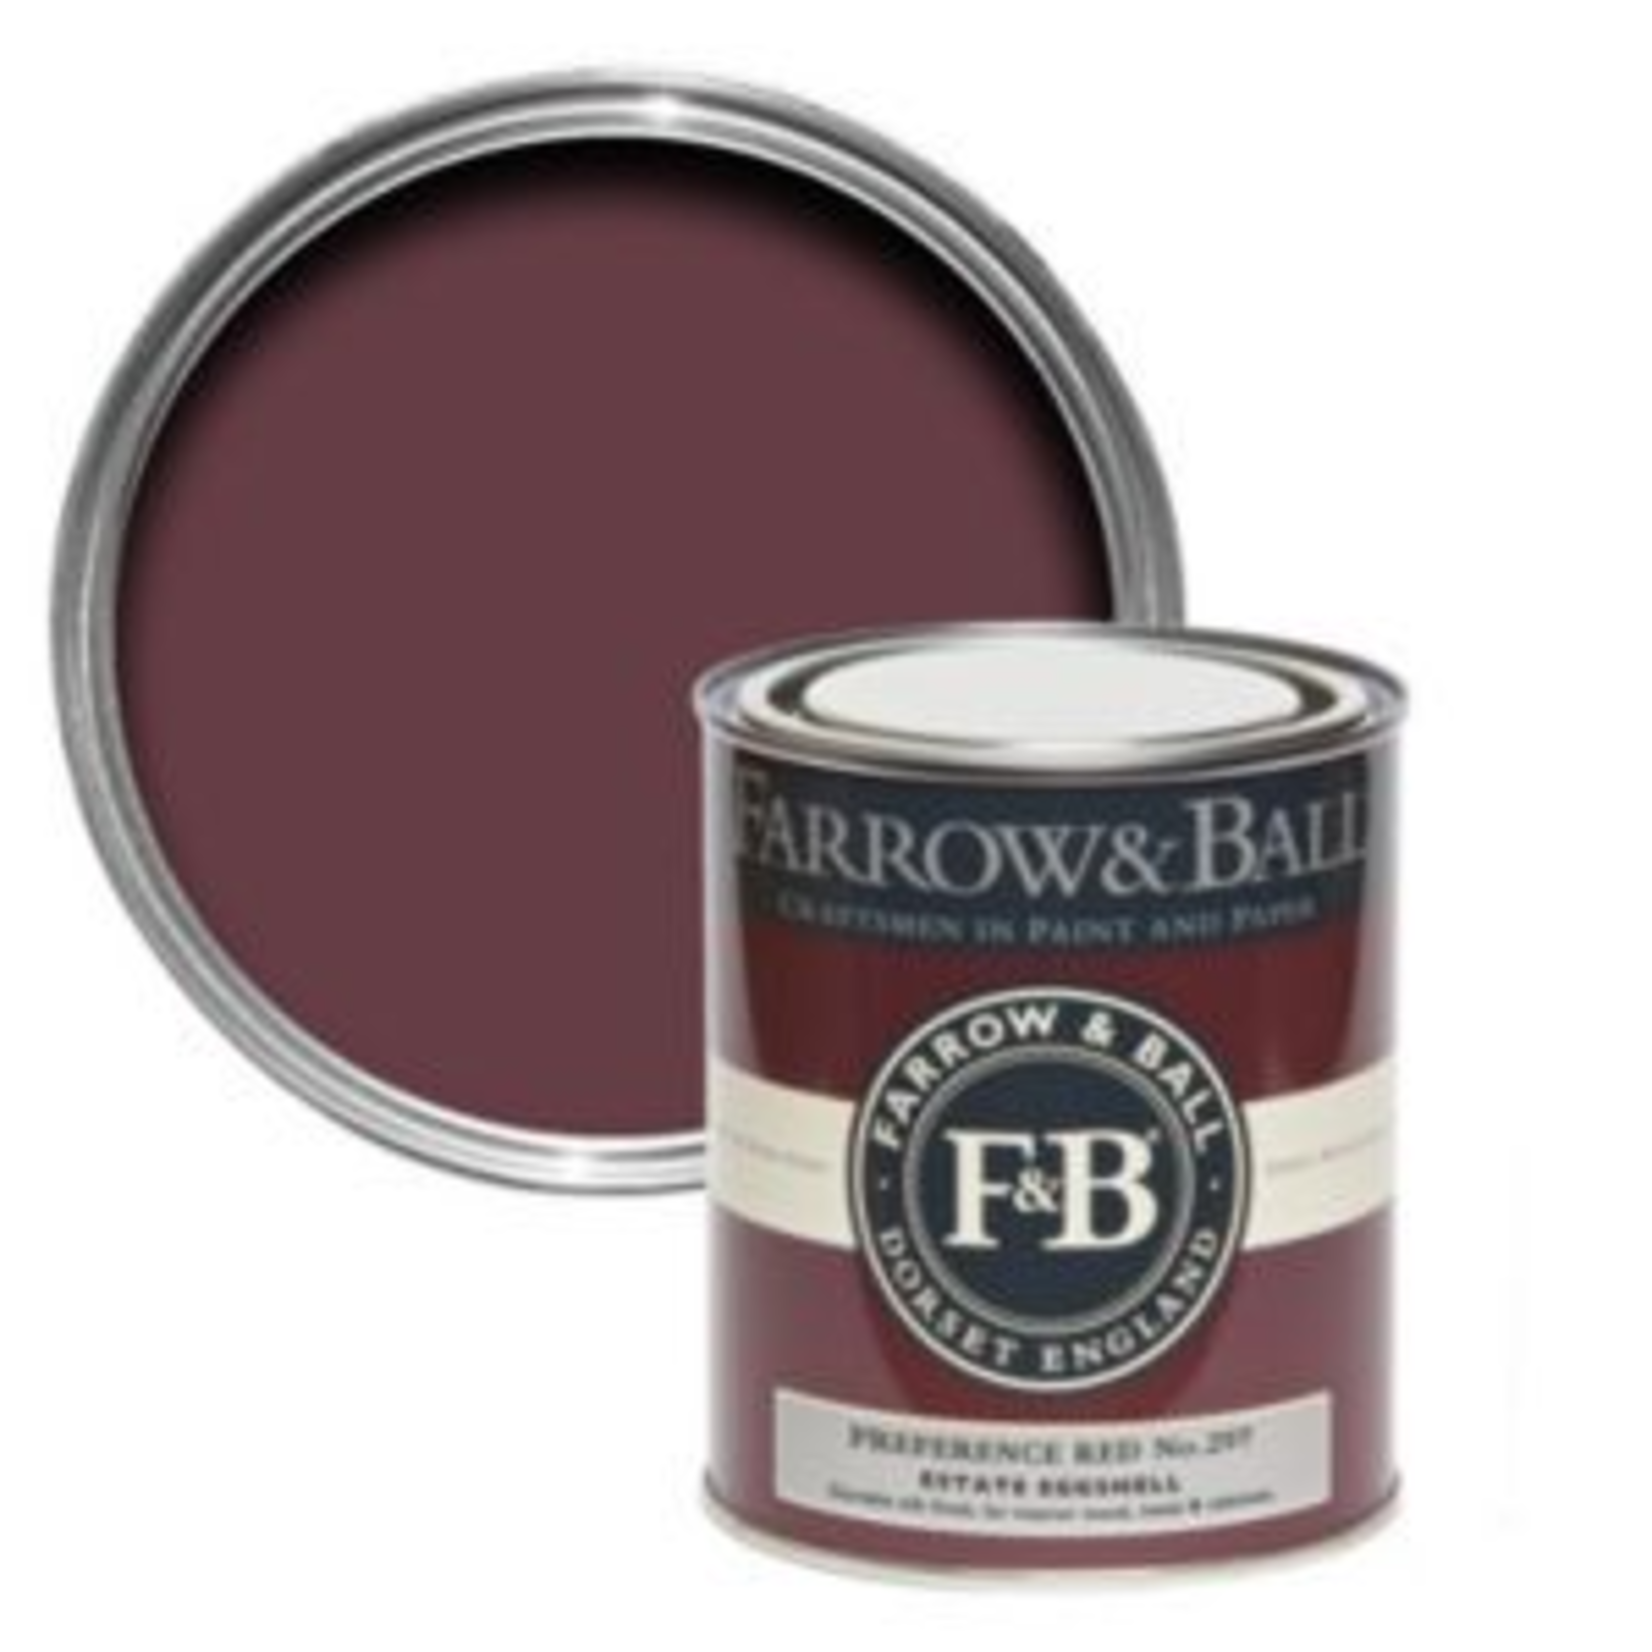 Farrow and Ball 750ml Modern Eggshell Preference Red No.297